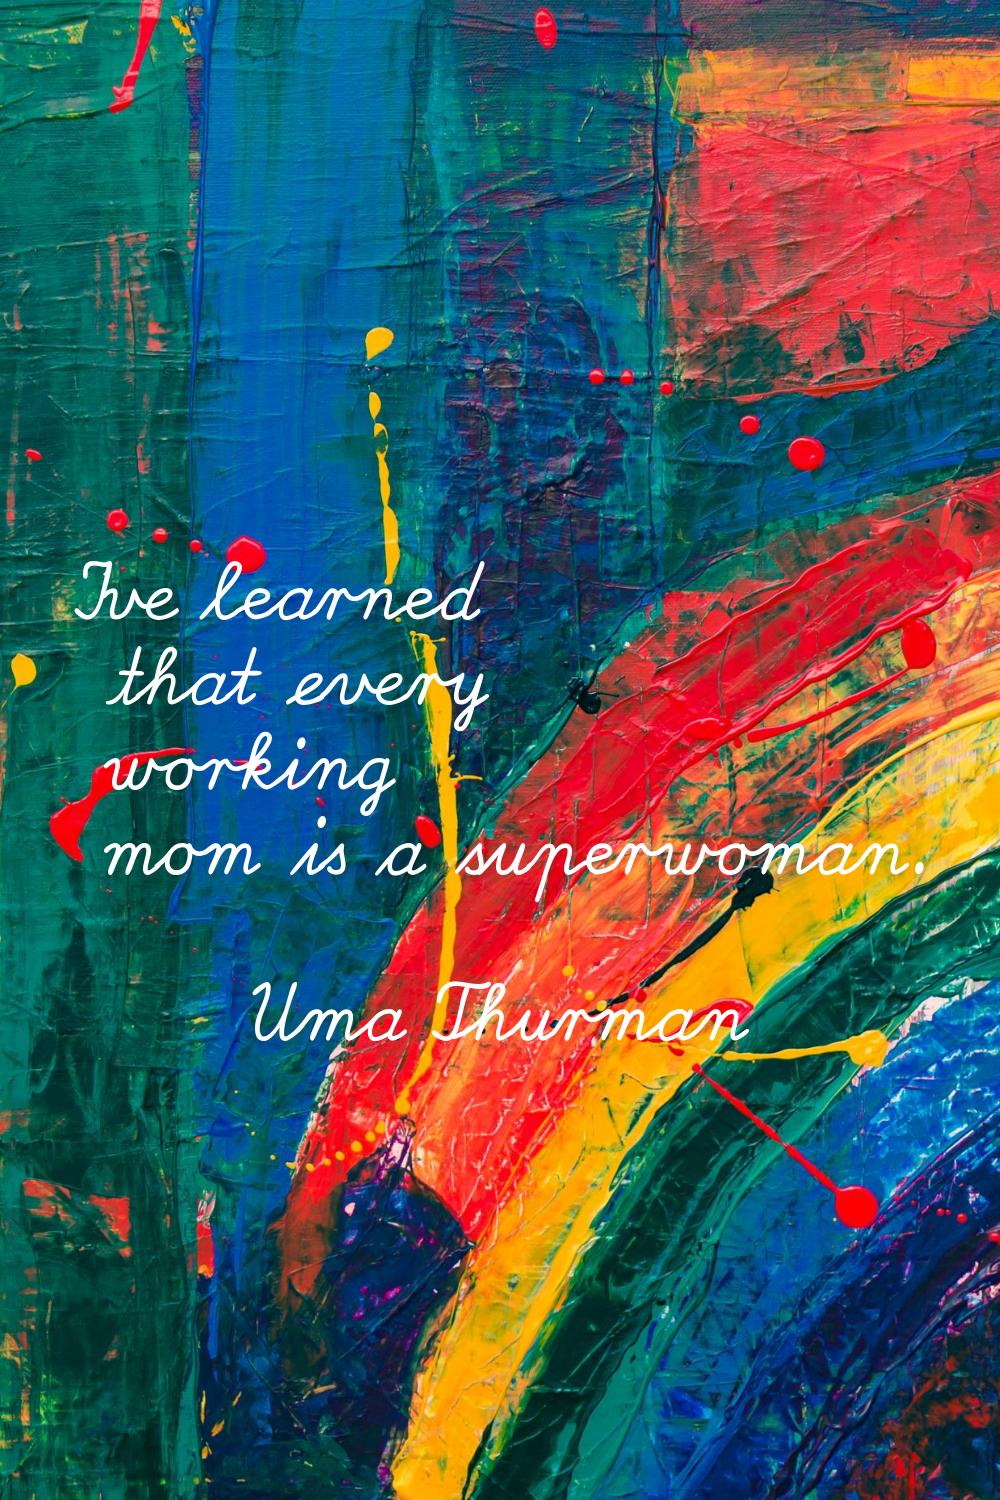 I've learned that every working mom is a superwoman.